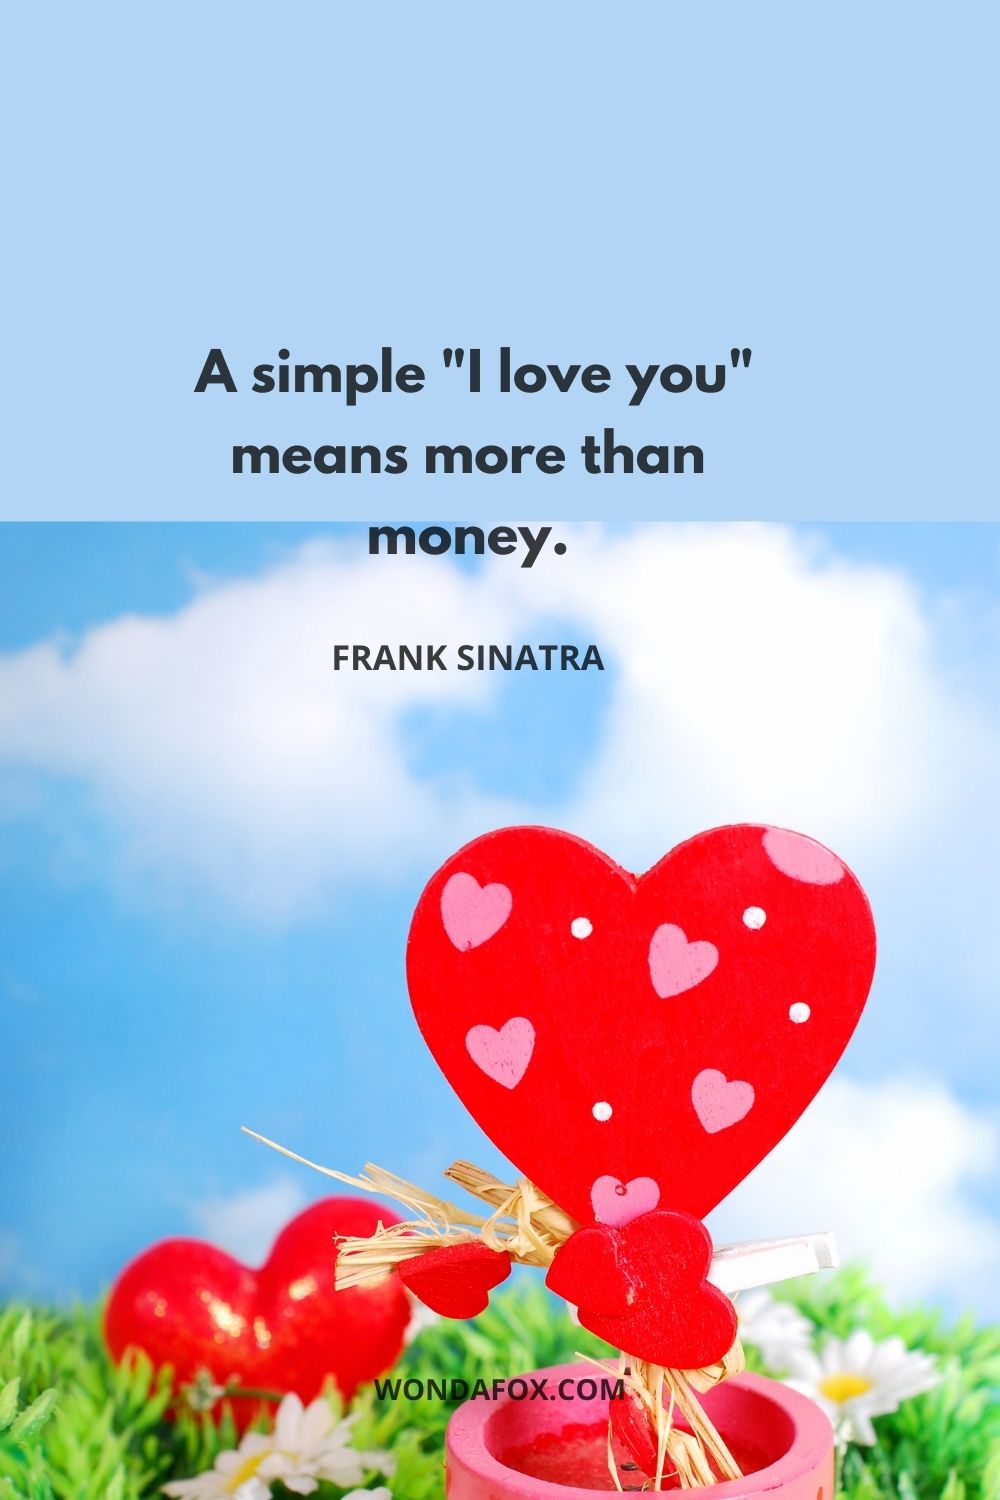  A simple "I love you" means more than money.